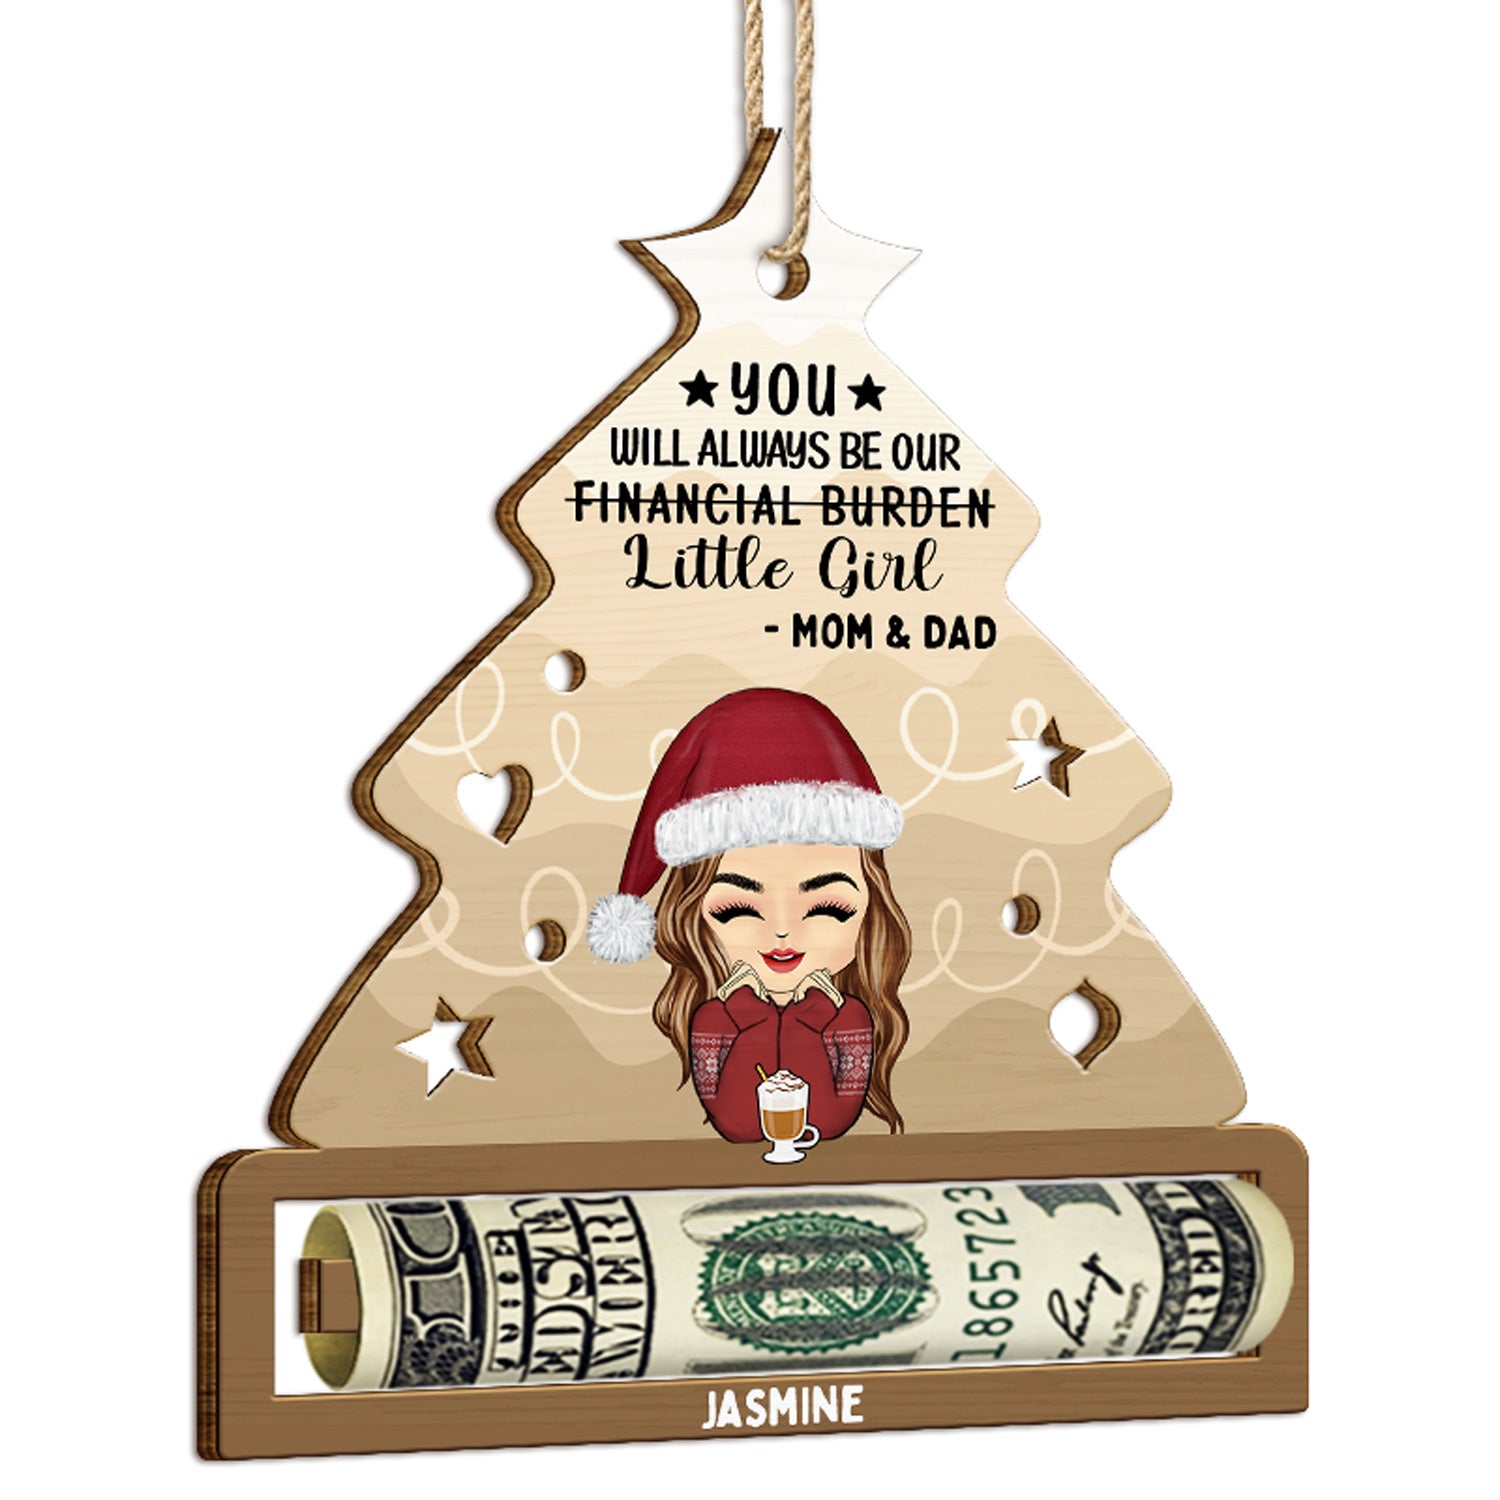 Financial Burden - Christmas Gift For Son Daughter - Personalized Wooden Cutout Ornament, Money Holder Ornament